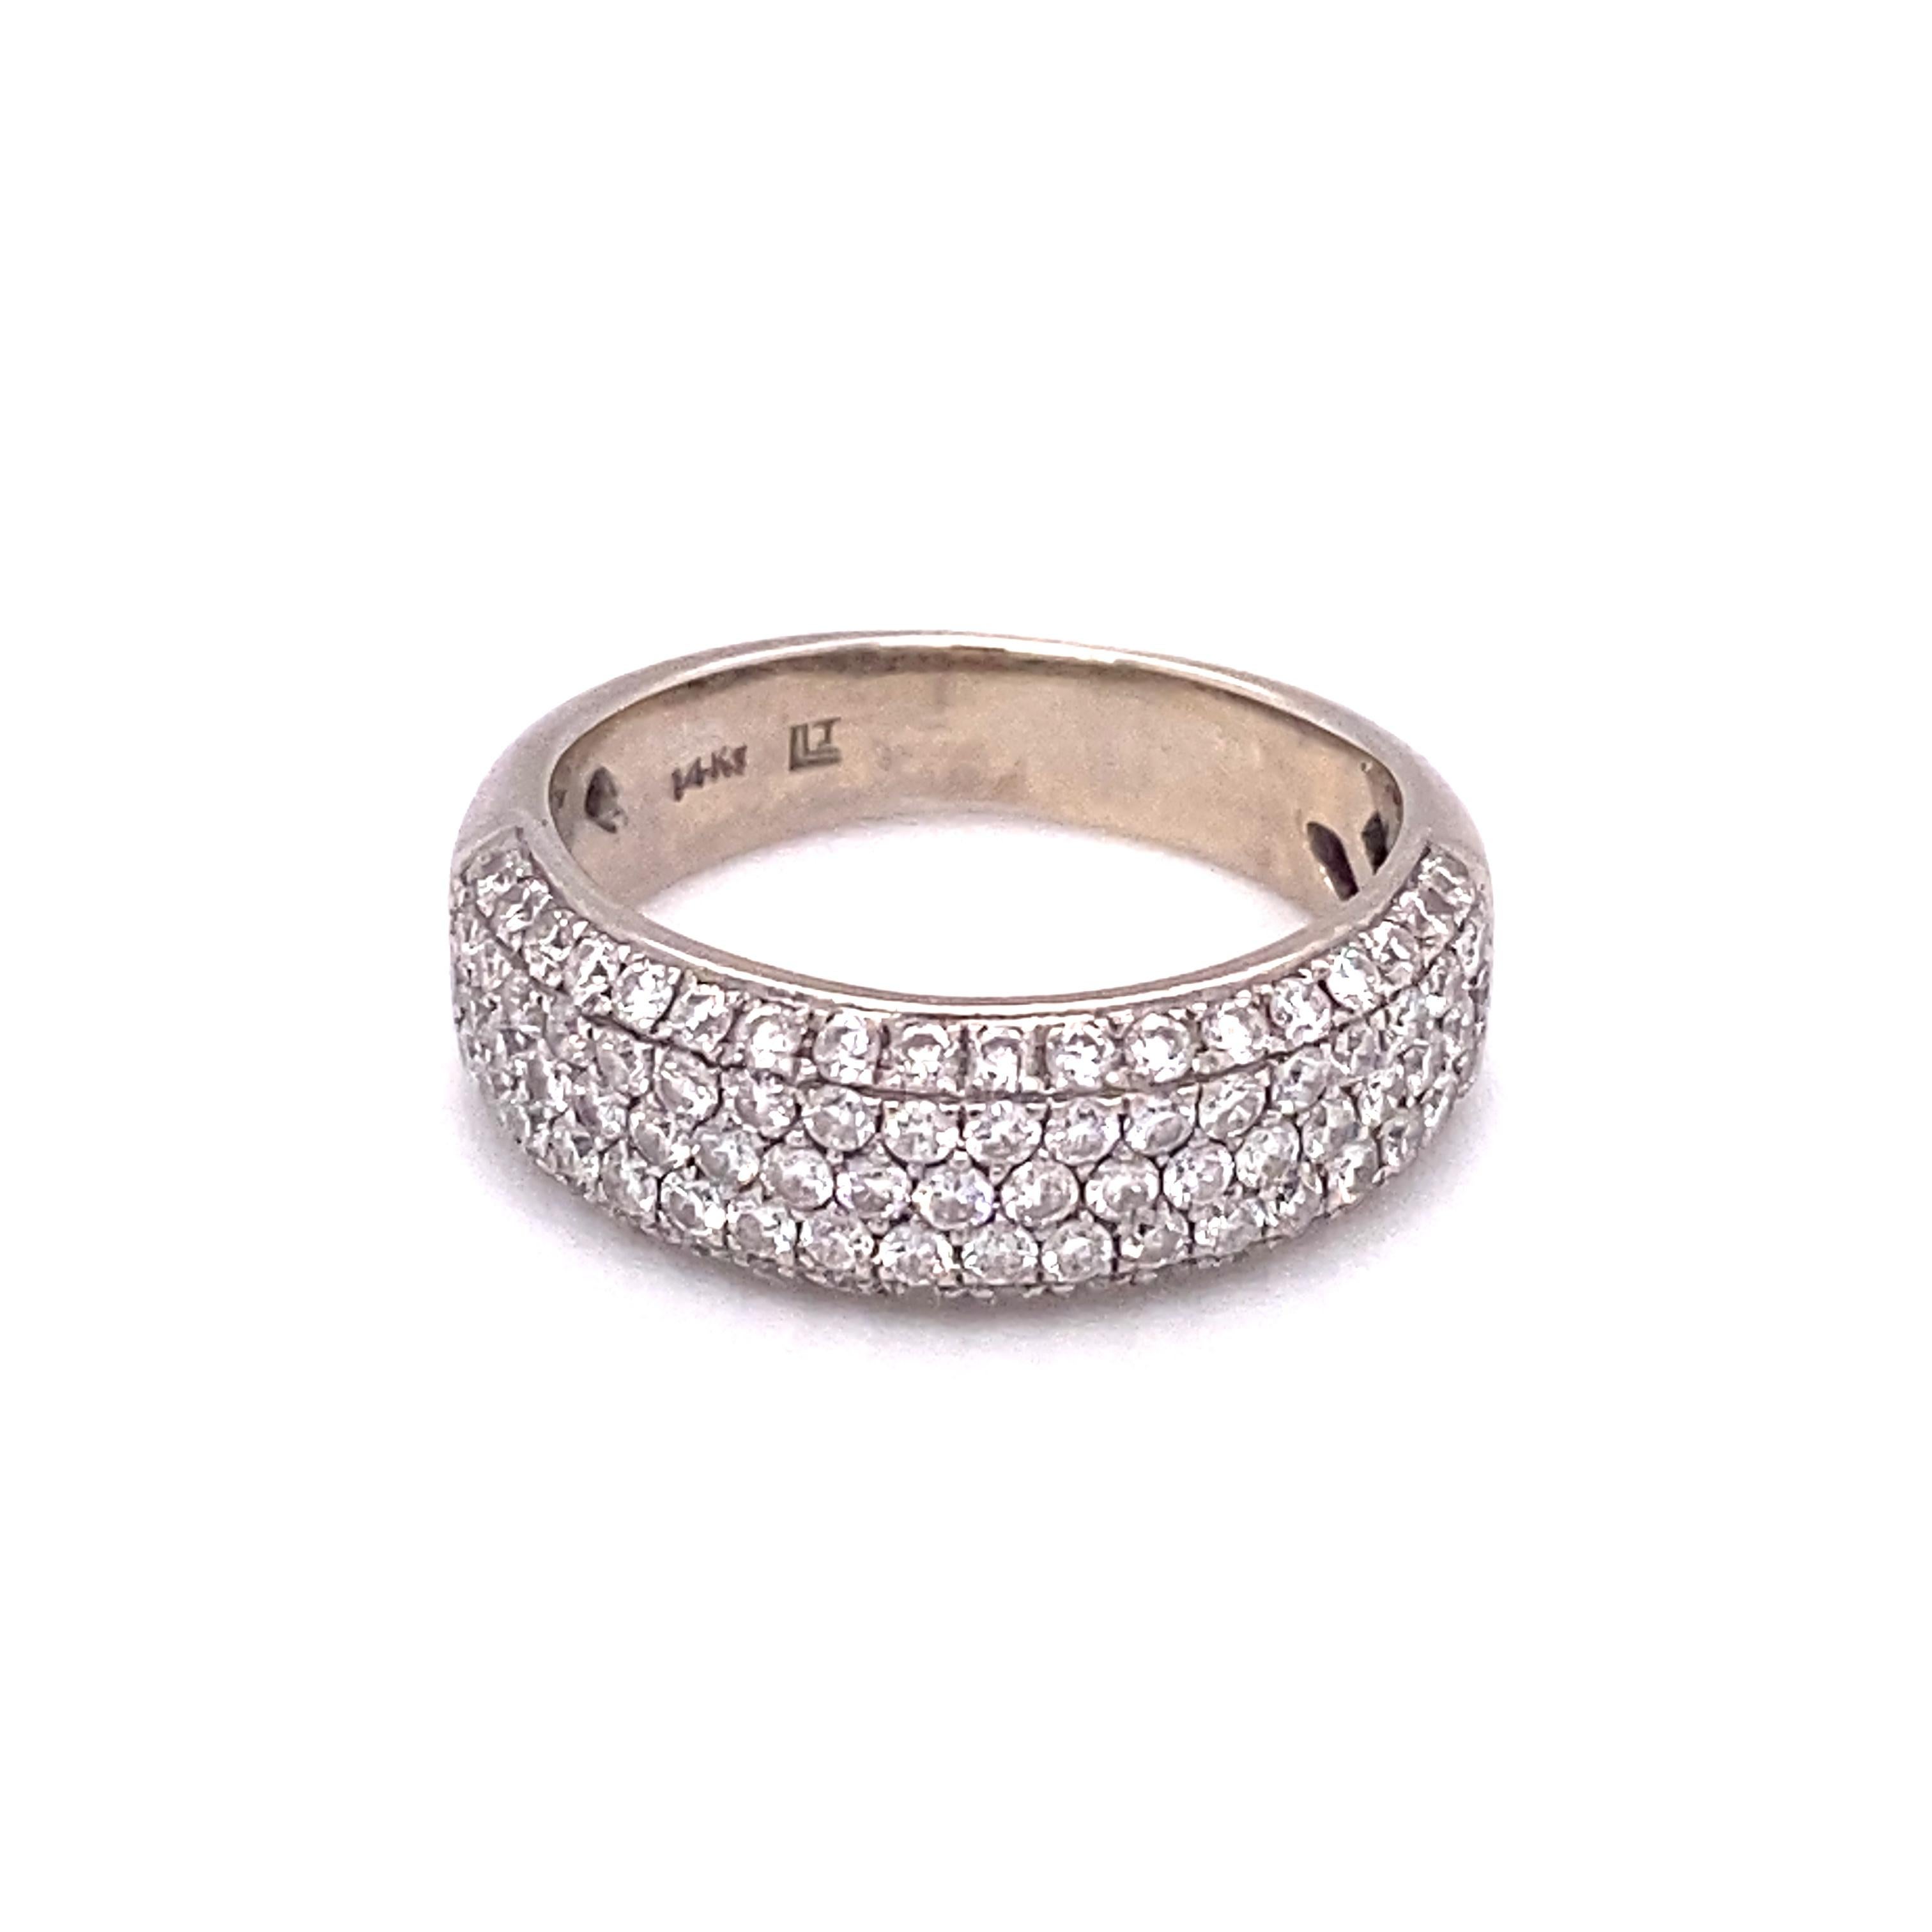 Item Details: This five row band features over one carat of diamonds. 

Circa: 2000s
Metal Type: 14 Karat White Gold
Weight: 4.3 grams
Size: US 5.5

Diamond Details:

Carat: 1.25 carat total weight
Shape: Round
Color: G
Clarity: VS-SI
 